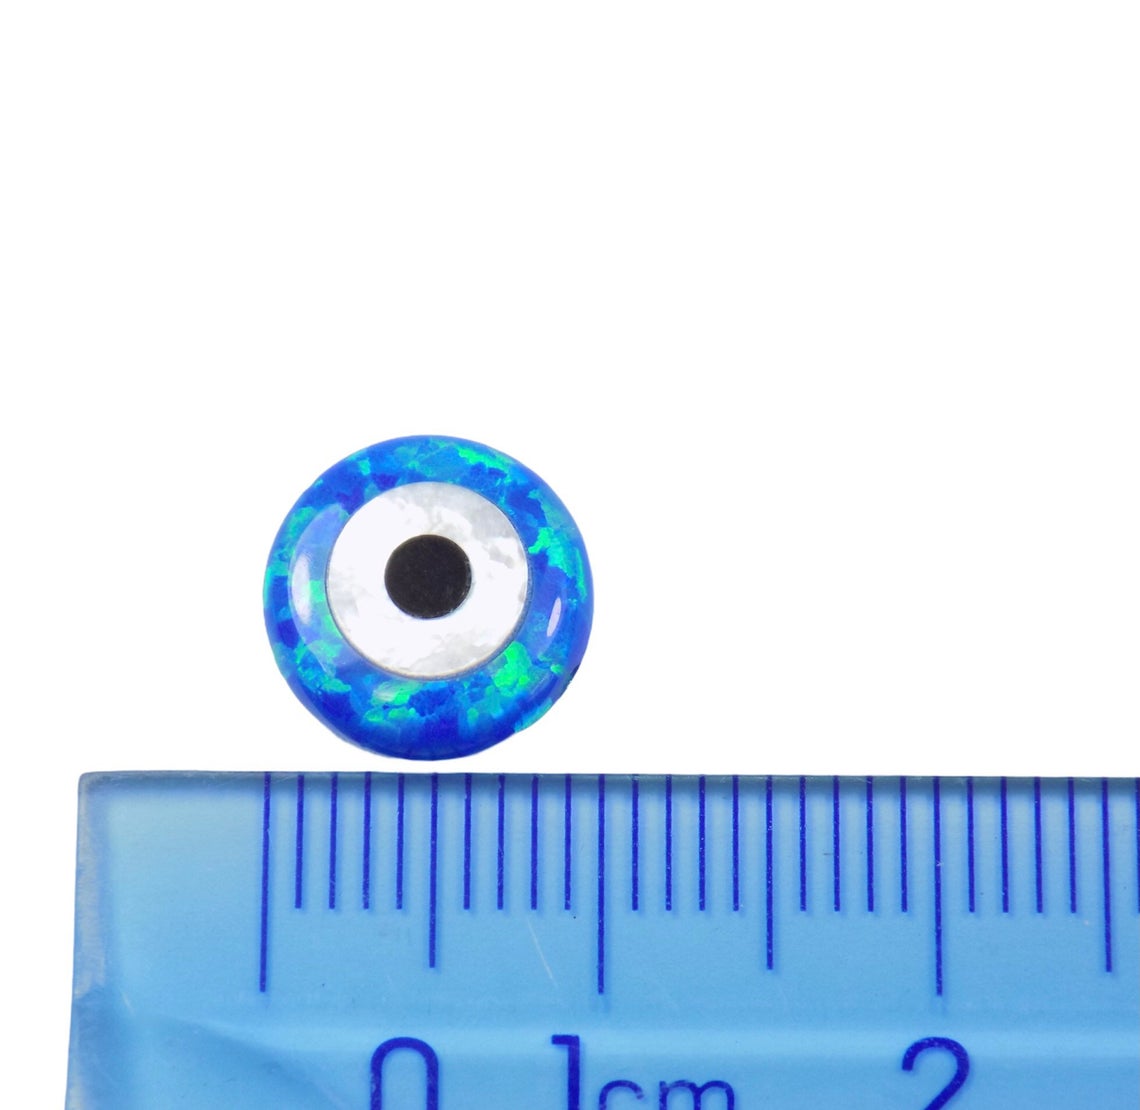 Blue Evil Eye Charm with Mother of Pearl Double Puff